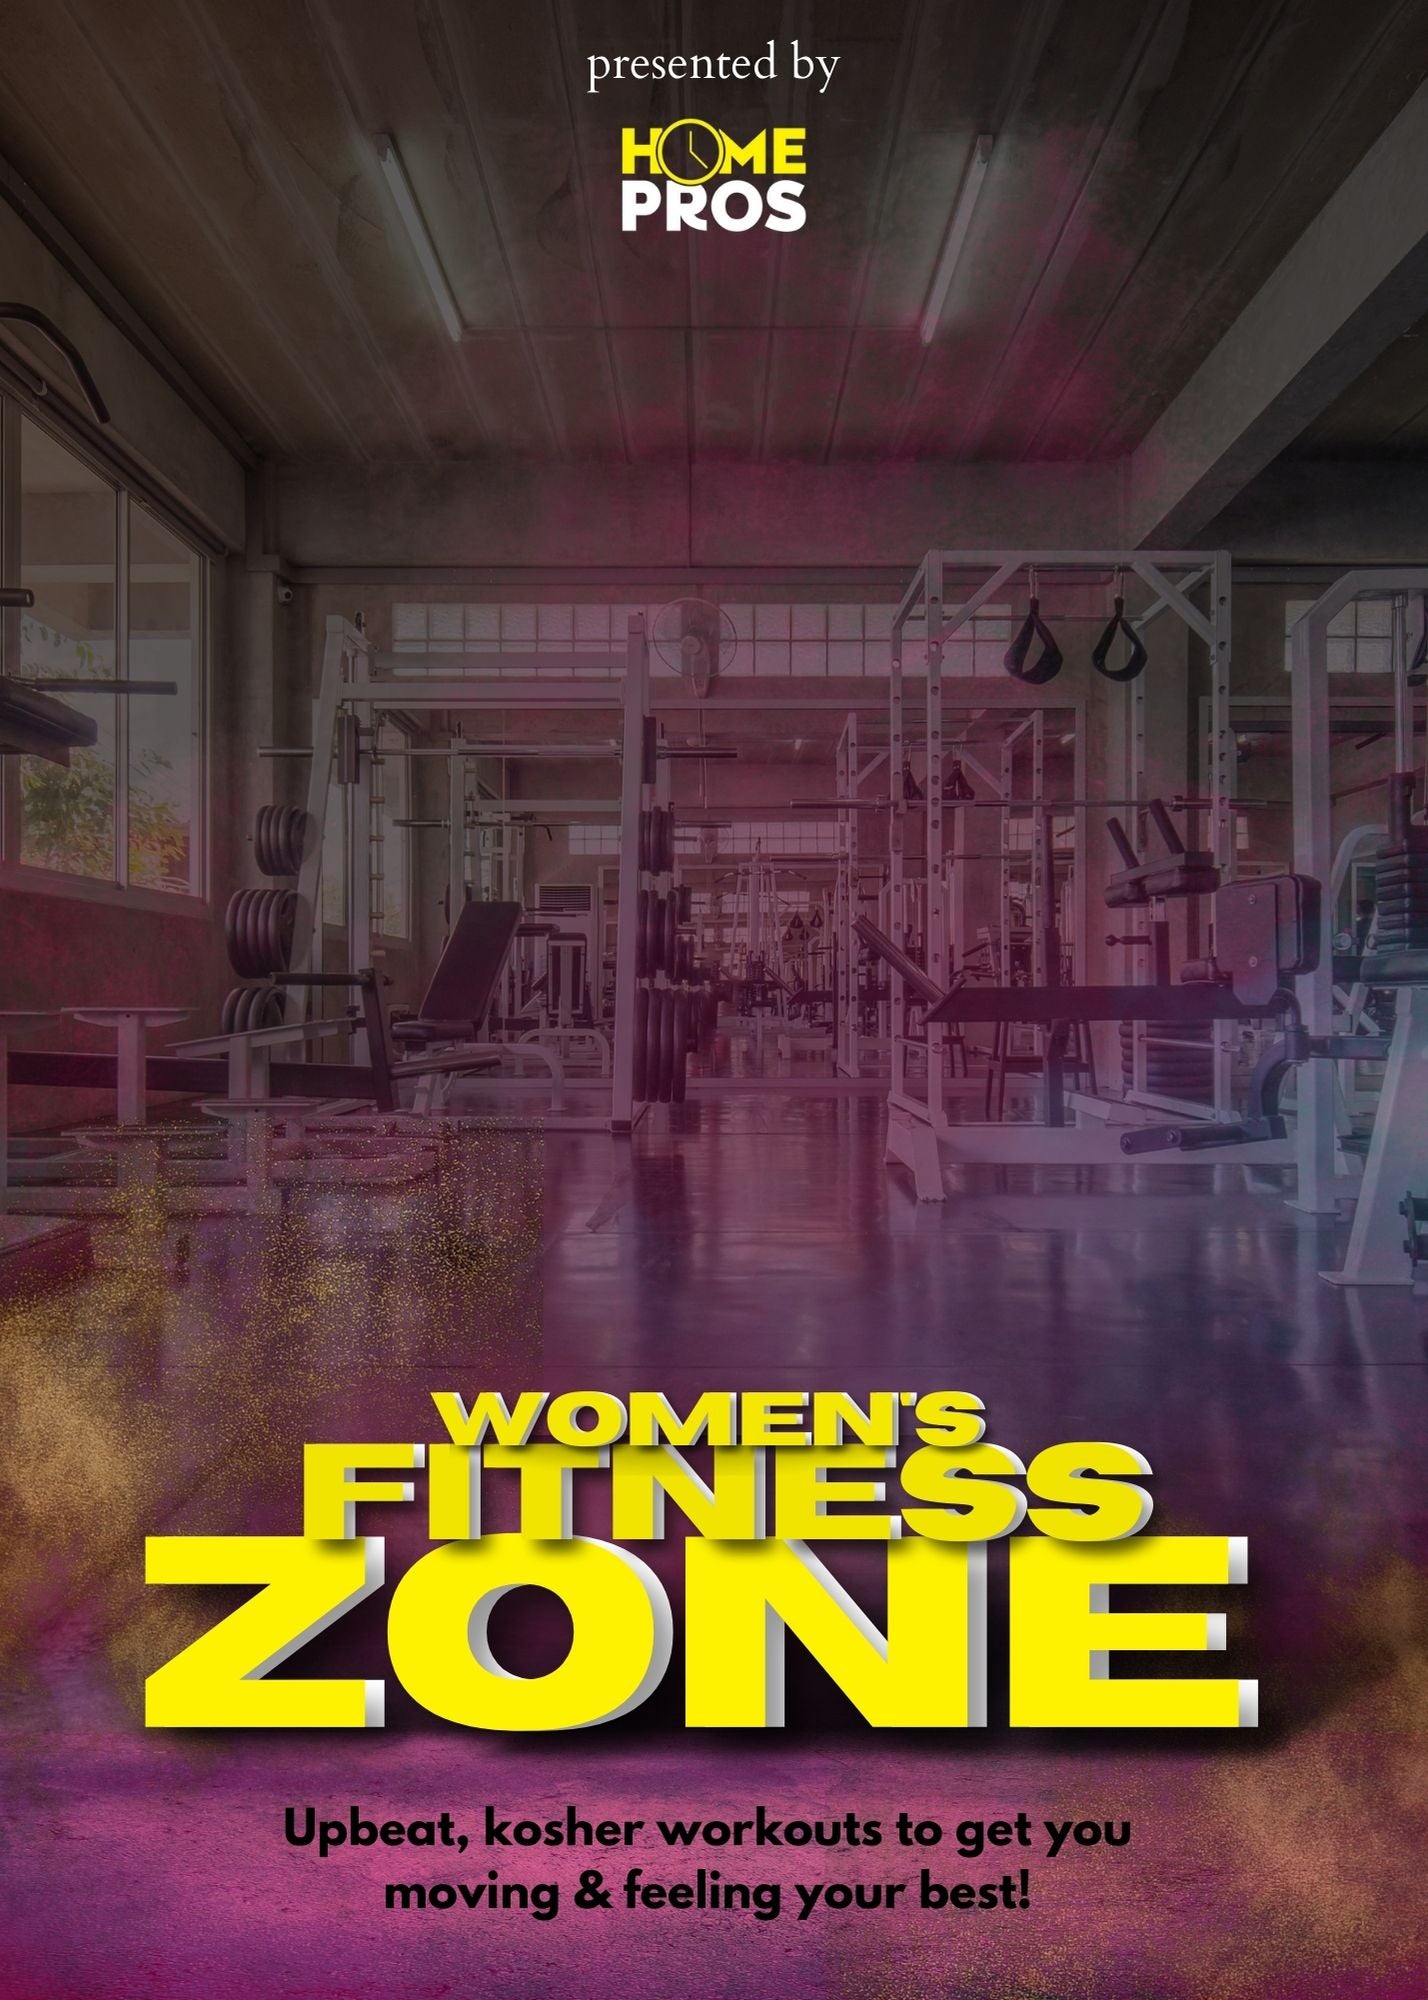 Home Pros - Women's Fitness Zone (Video)